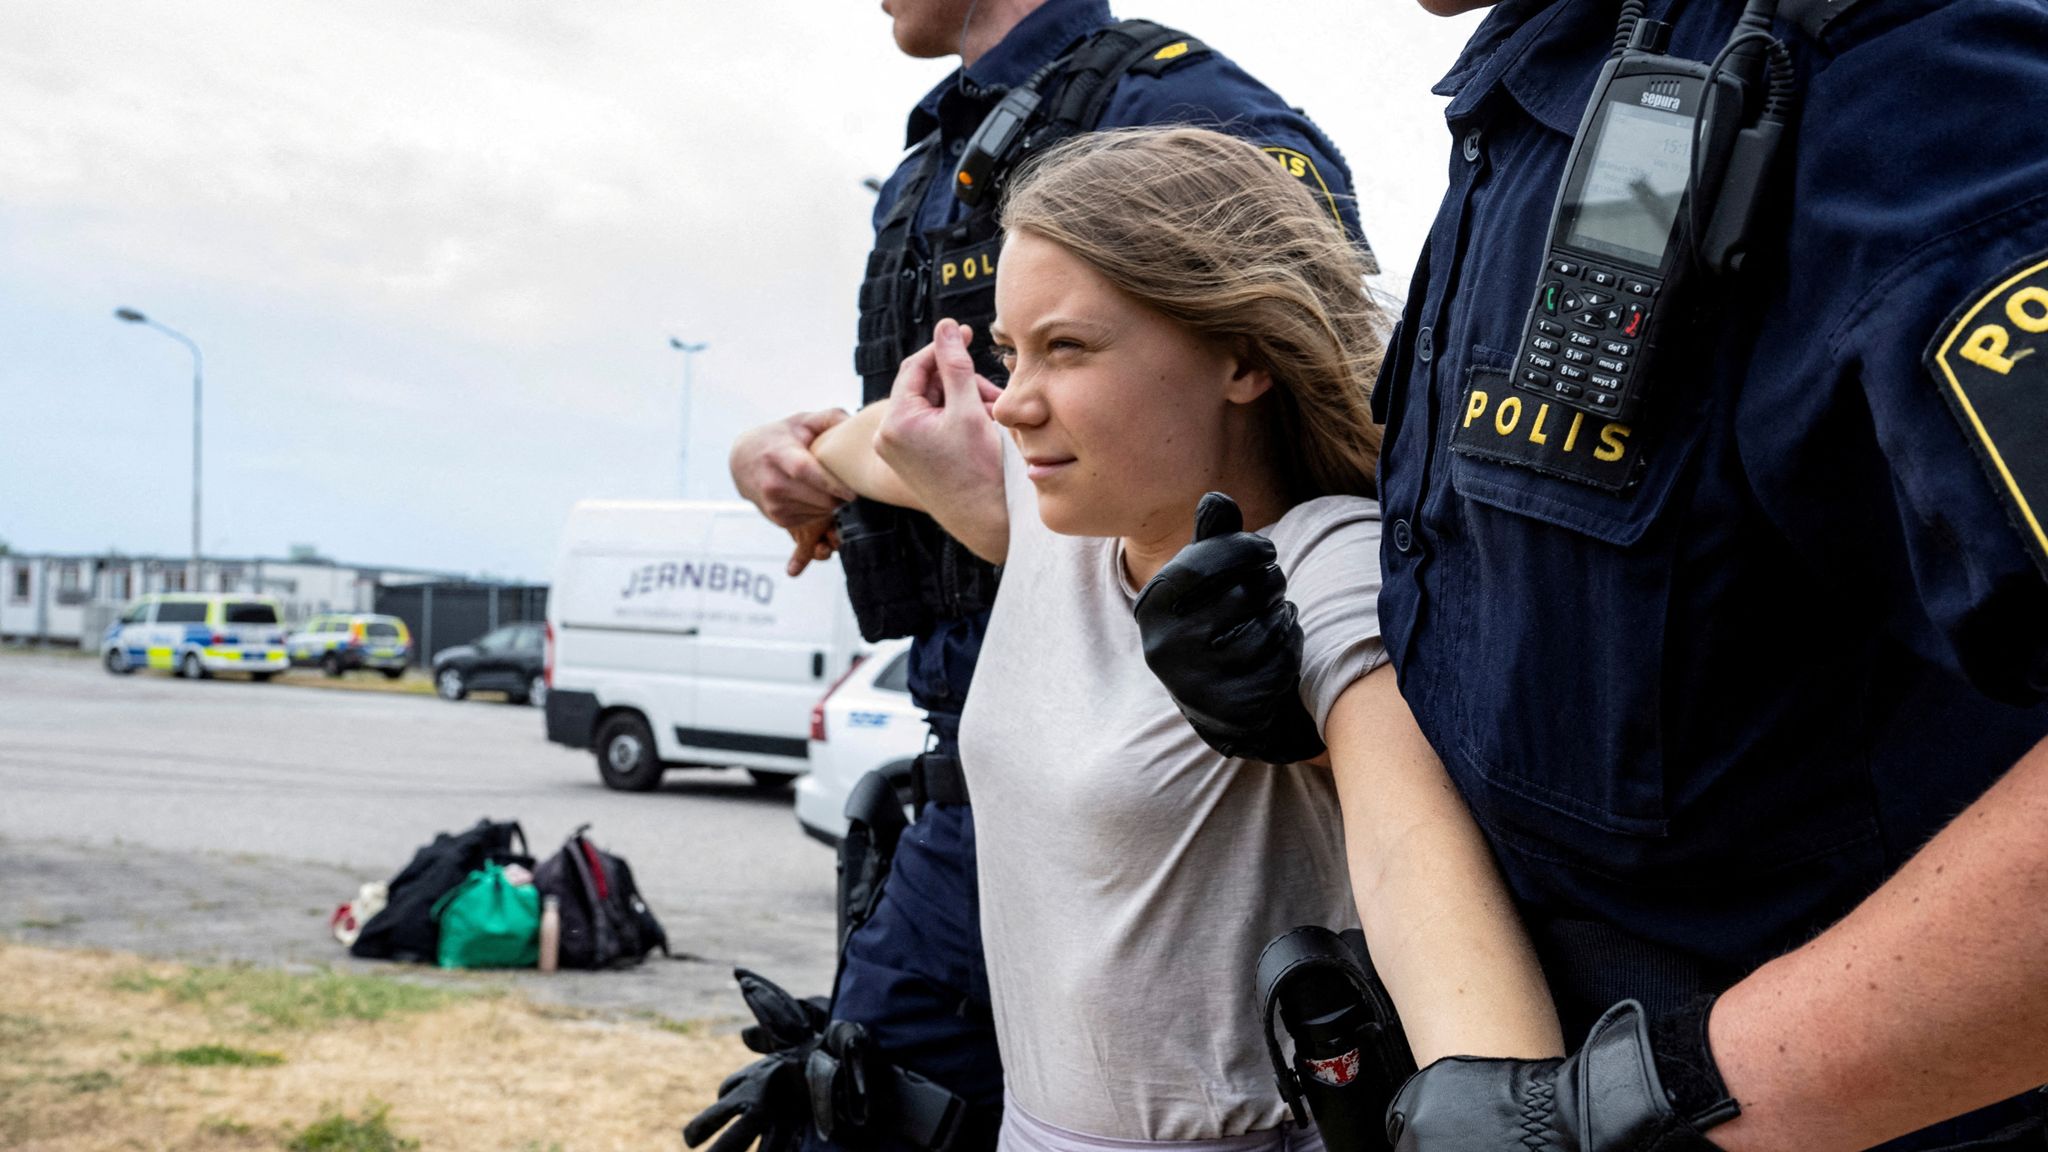 Greta Thunberg Climate activist charged with disobeying police order